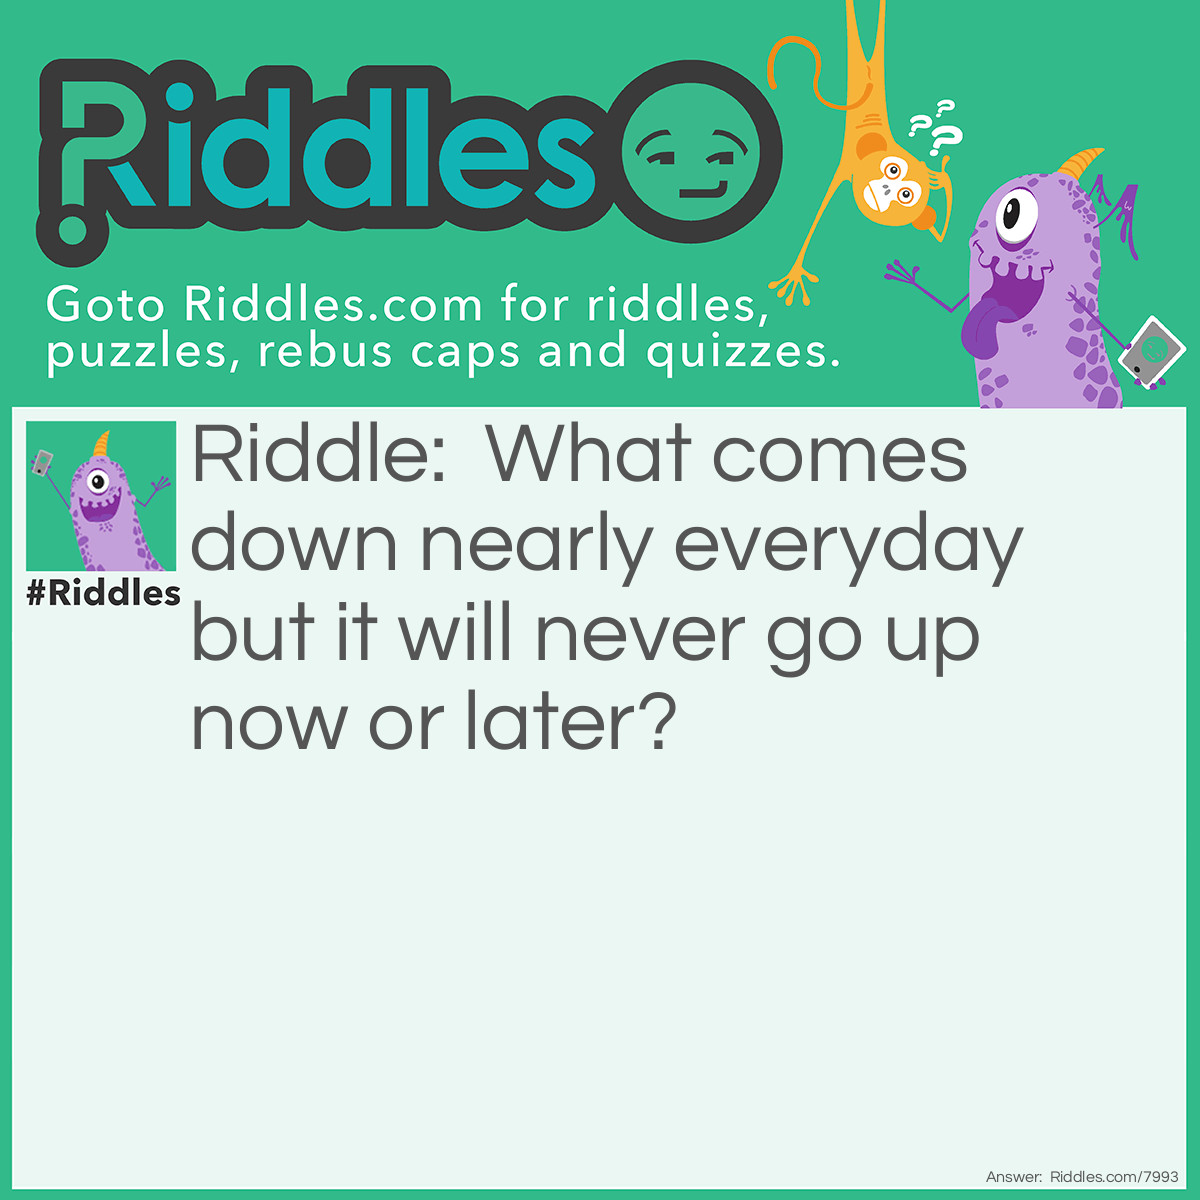 Riddle: What comes down nearly everyday but it will never go up now or later? Answer: Rain.